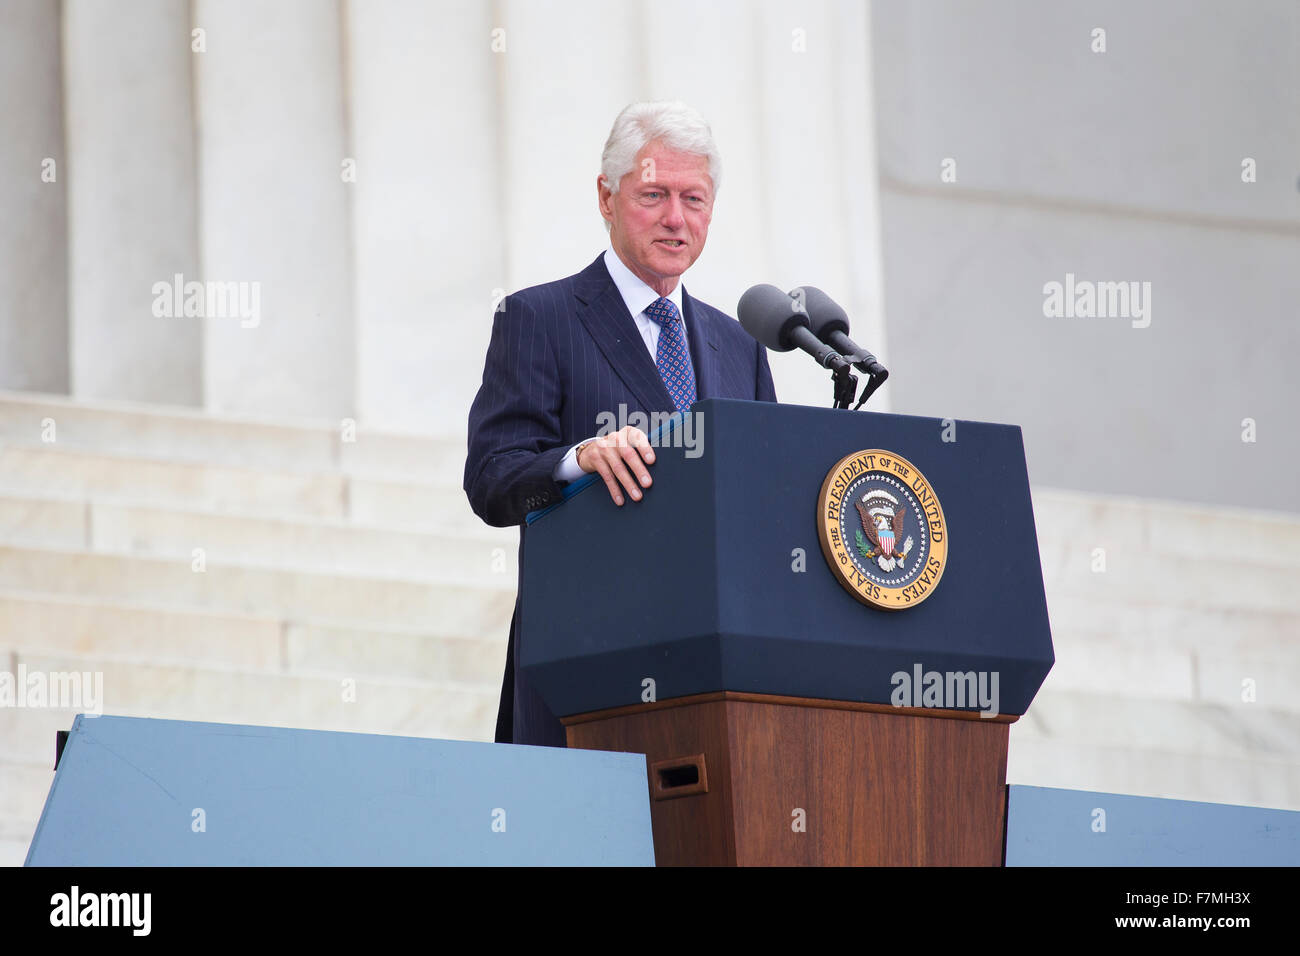 Former US president Bill Clinton speaks during the Let Freedom Ring Commemoration, the 50th anniversary of the March on Washington for Jobs and Freedom at the Lincoln Memorial in Washington, DC on August 28, 2013. Stock Photo